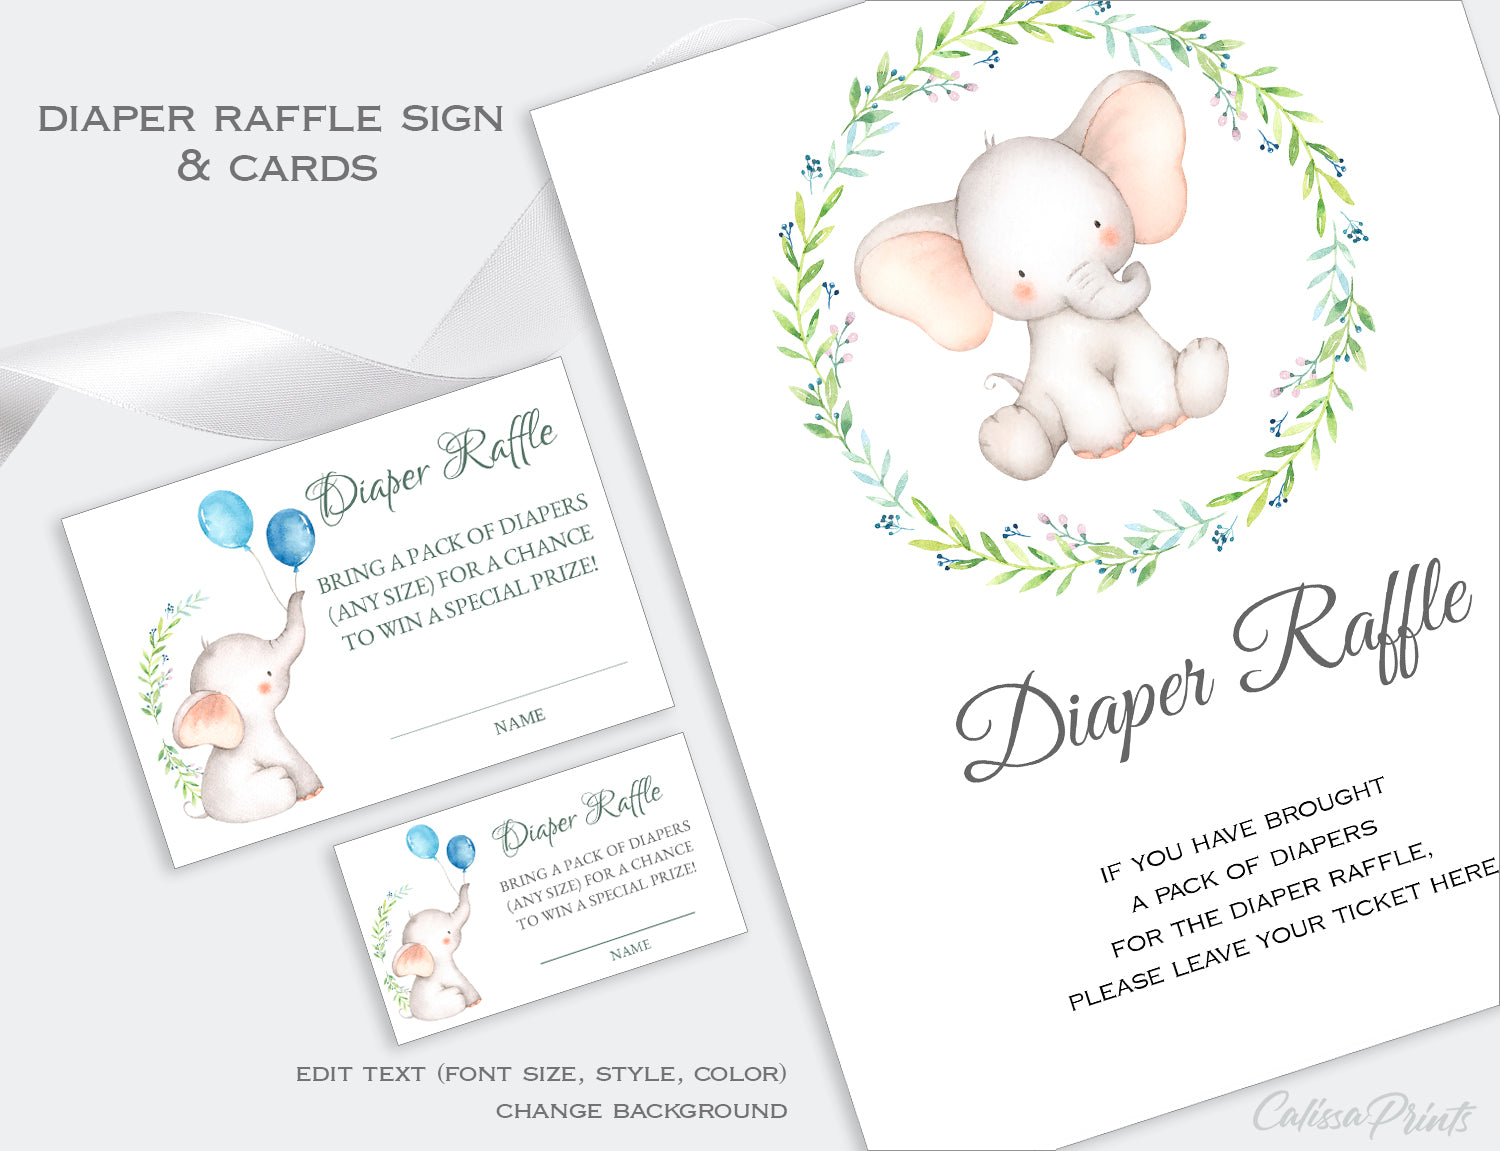 Diaper Raffle Card, and Sign Templates - Baby Elephant Design, BABY12 - CalissaPrints